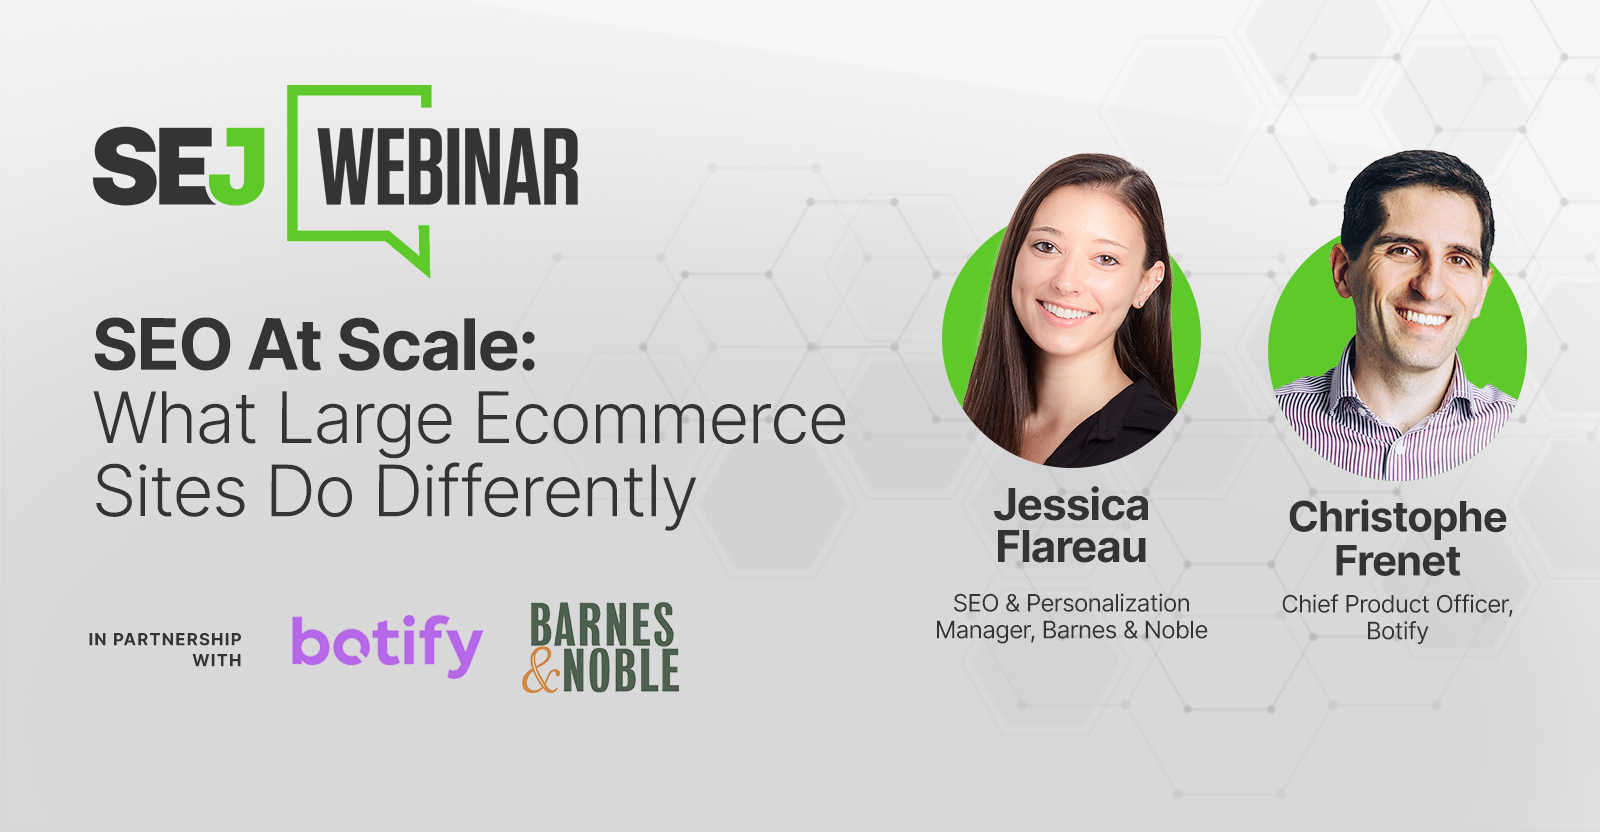 SEO At Scale: What Large Ecommerce Sites Do Differently via @sejournal, @duchessjenm